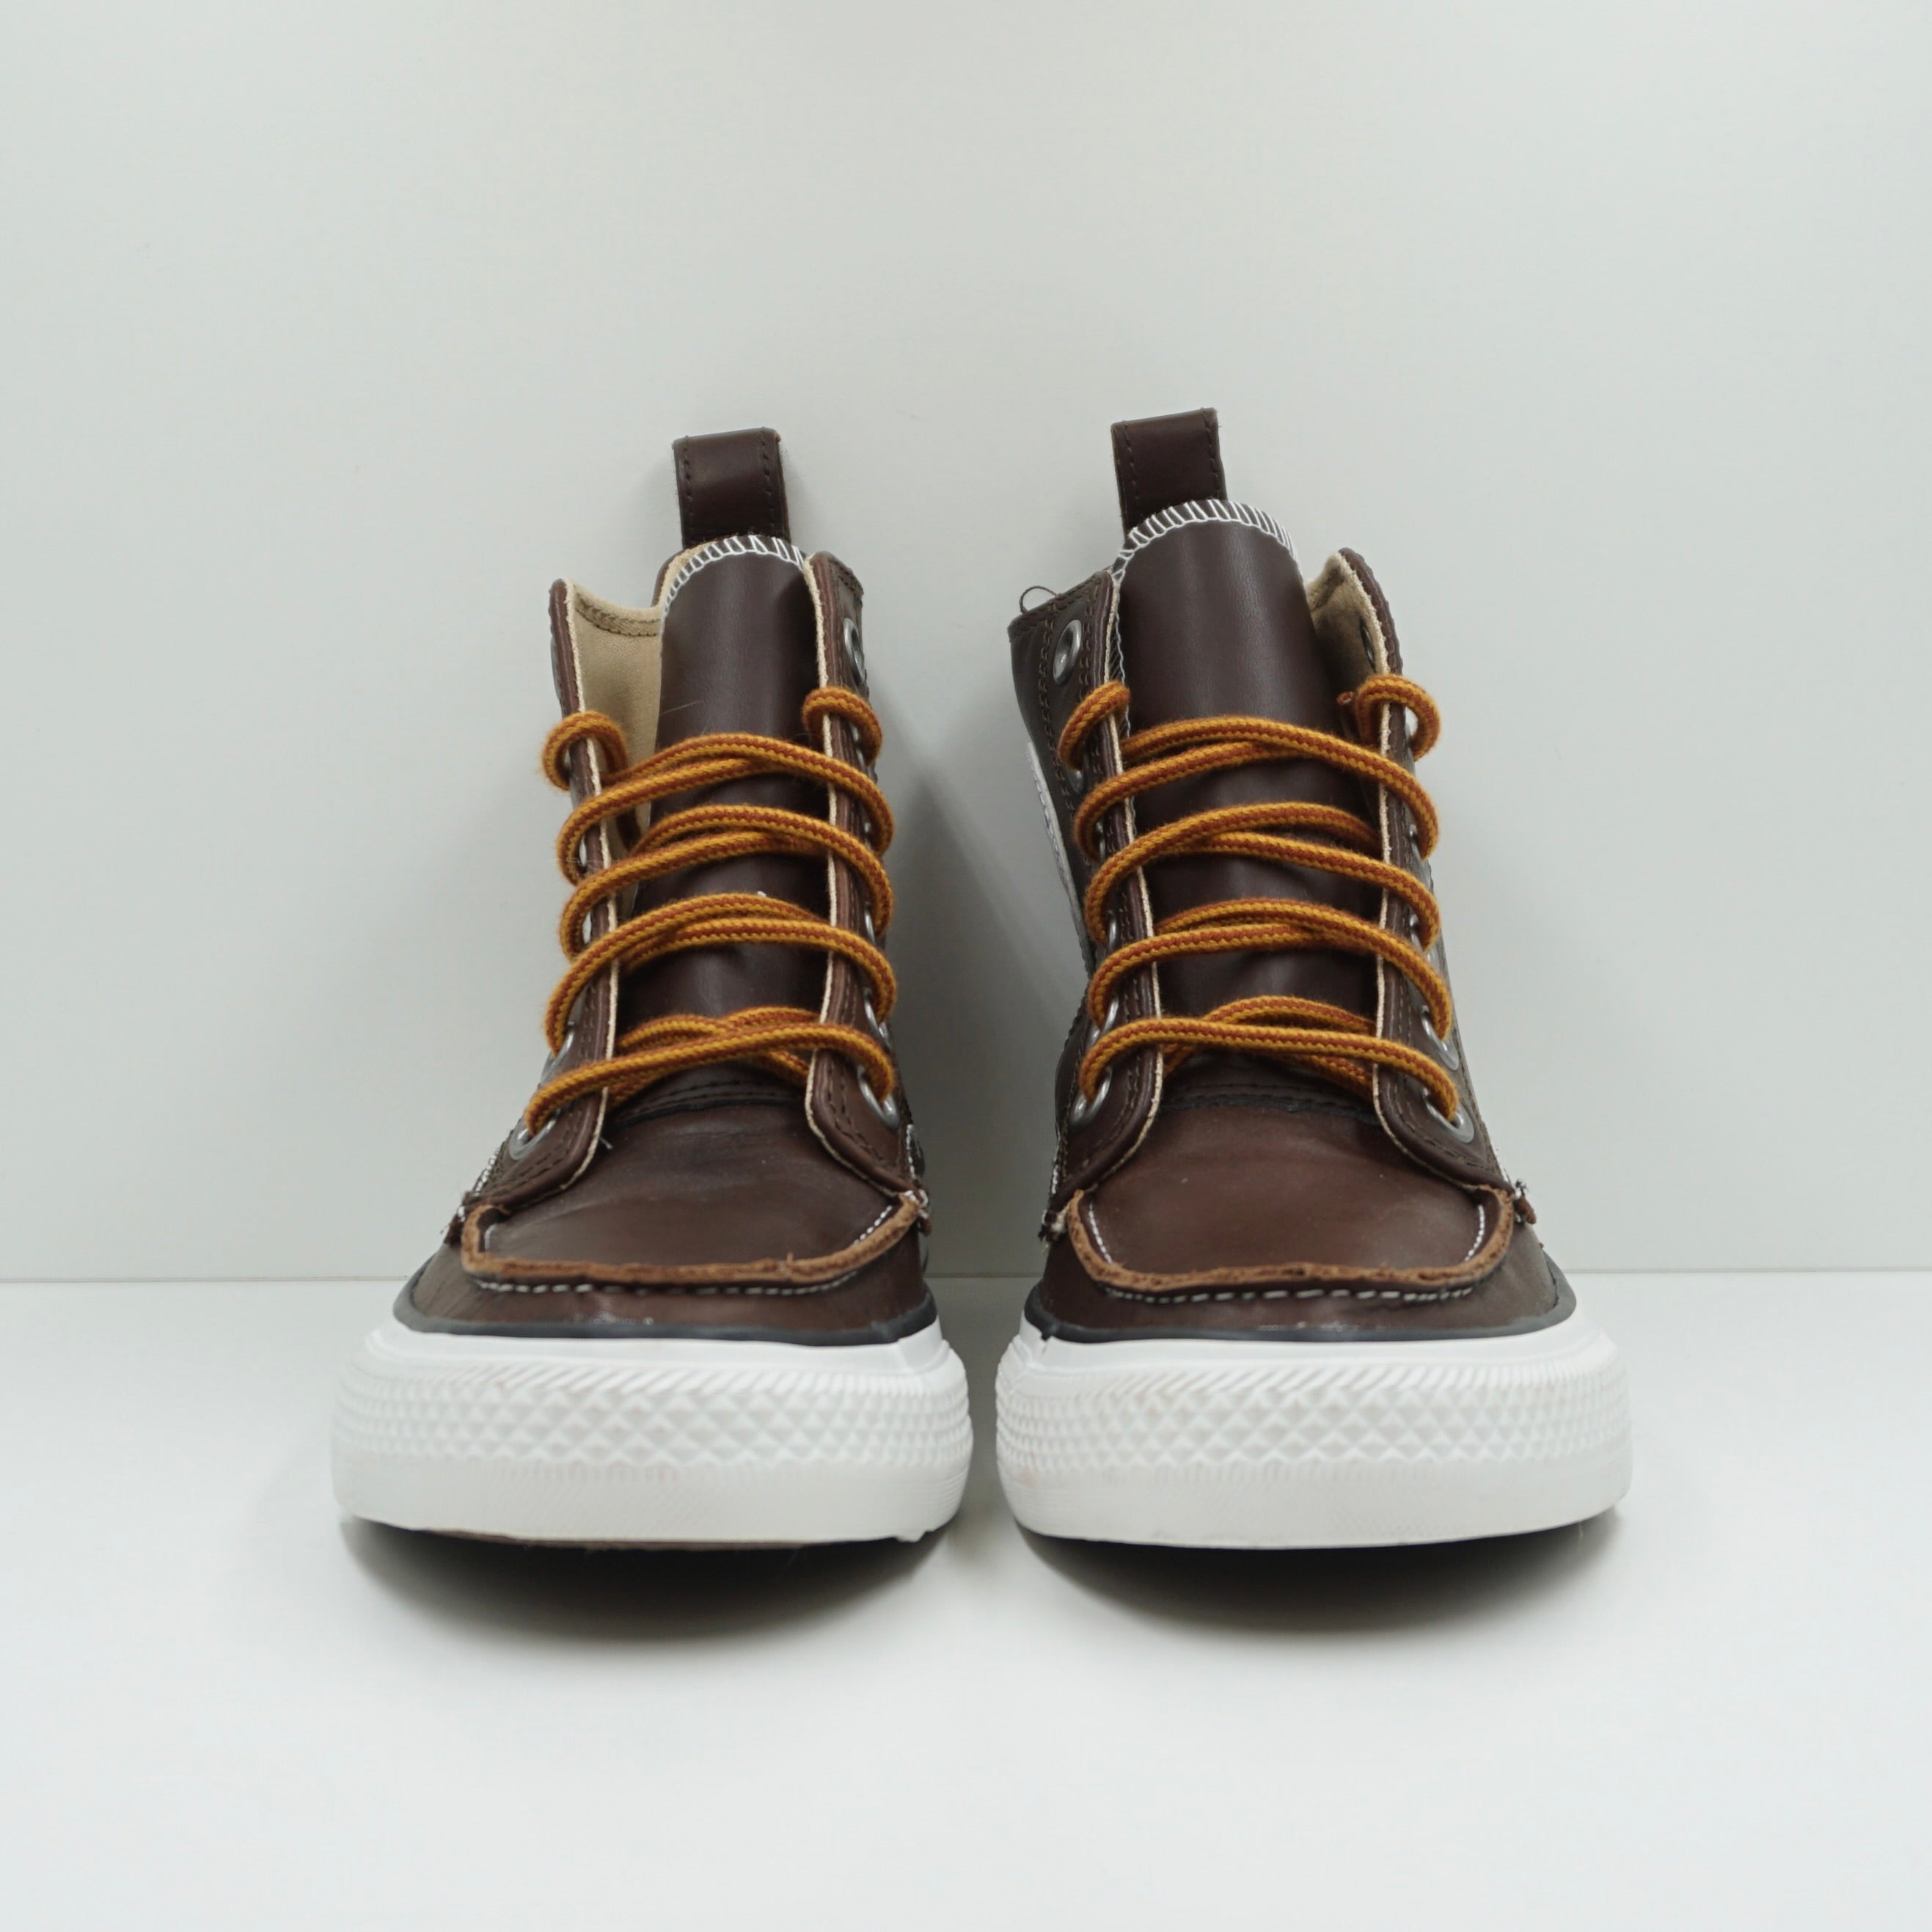 Converse Chuck Taylor All Star Hi Hiker Brown Leather